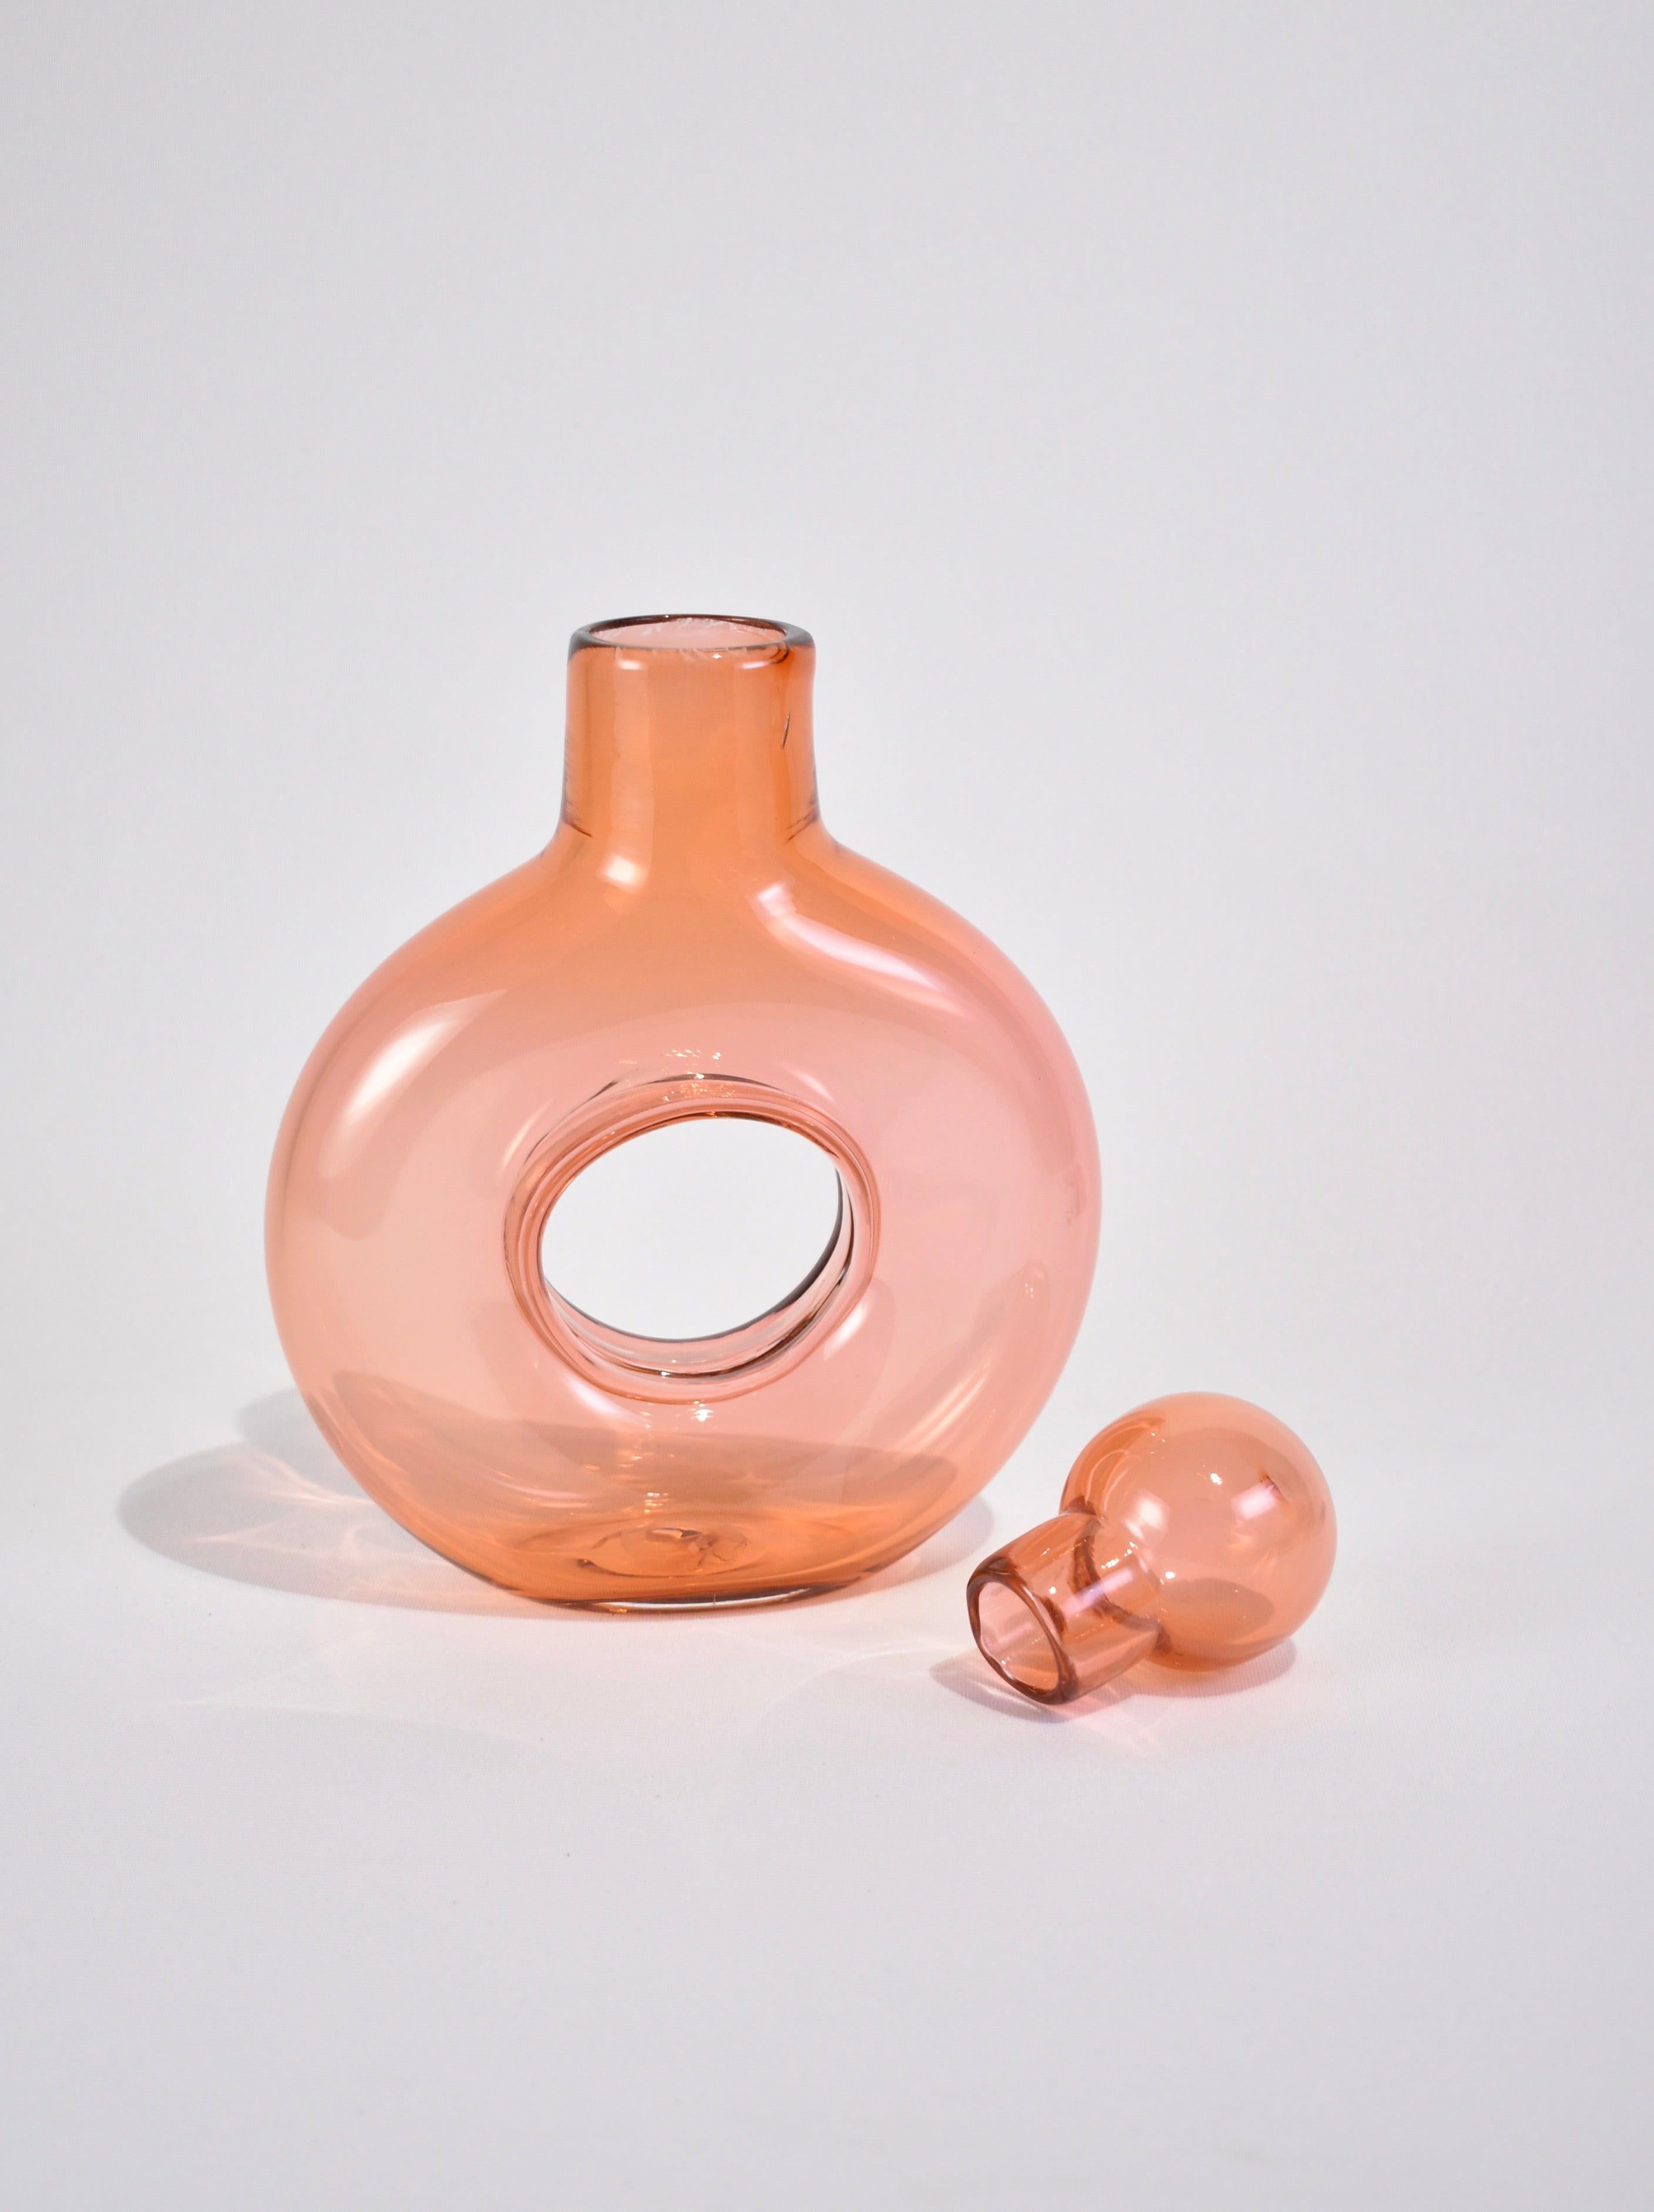 Our in-house collection pairs modern rounded shapes with colors inspired by ancient Venetian glassware resulting in a functional, beautiful piece to be admired and used often. Each vessel is hand blown in Richmond, Virginia and